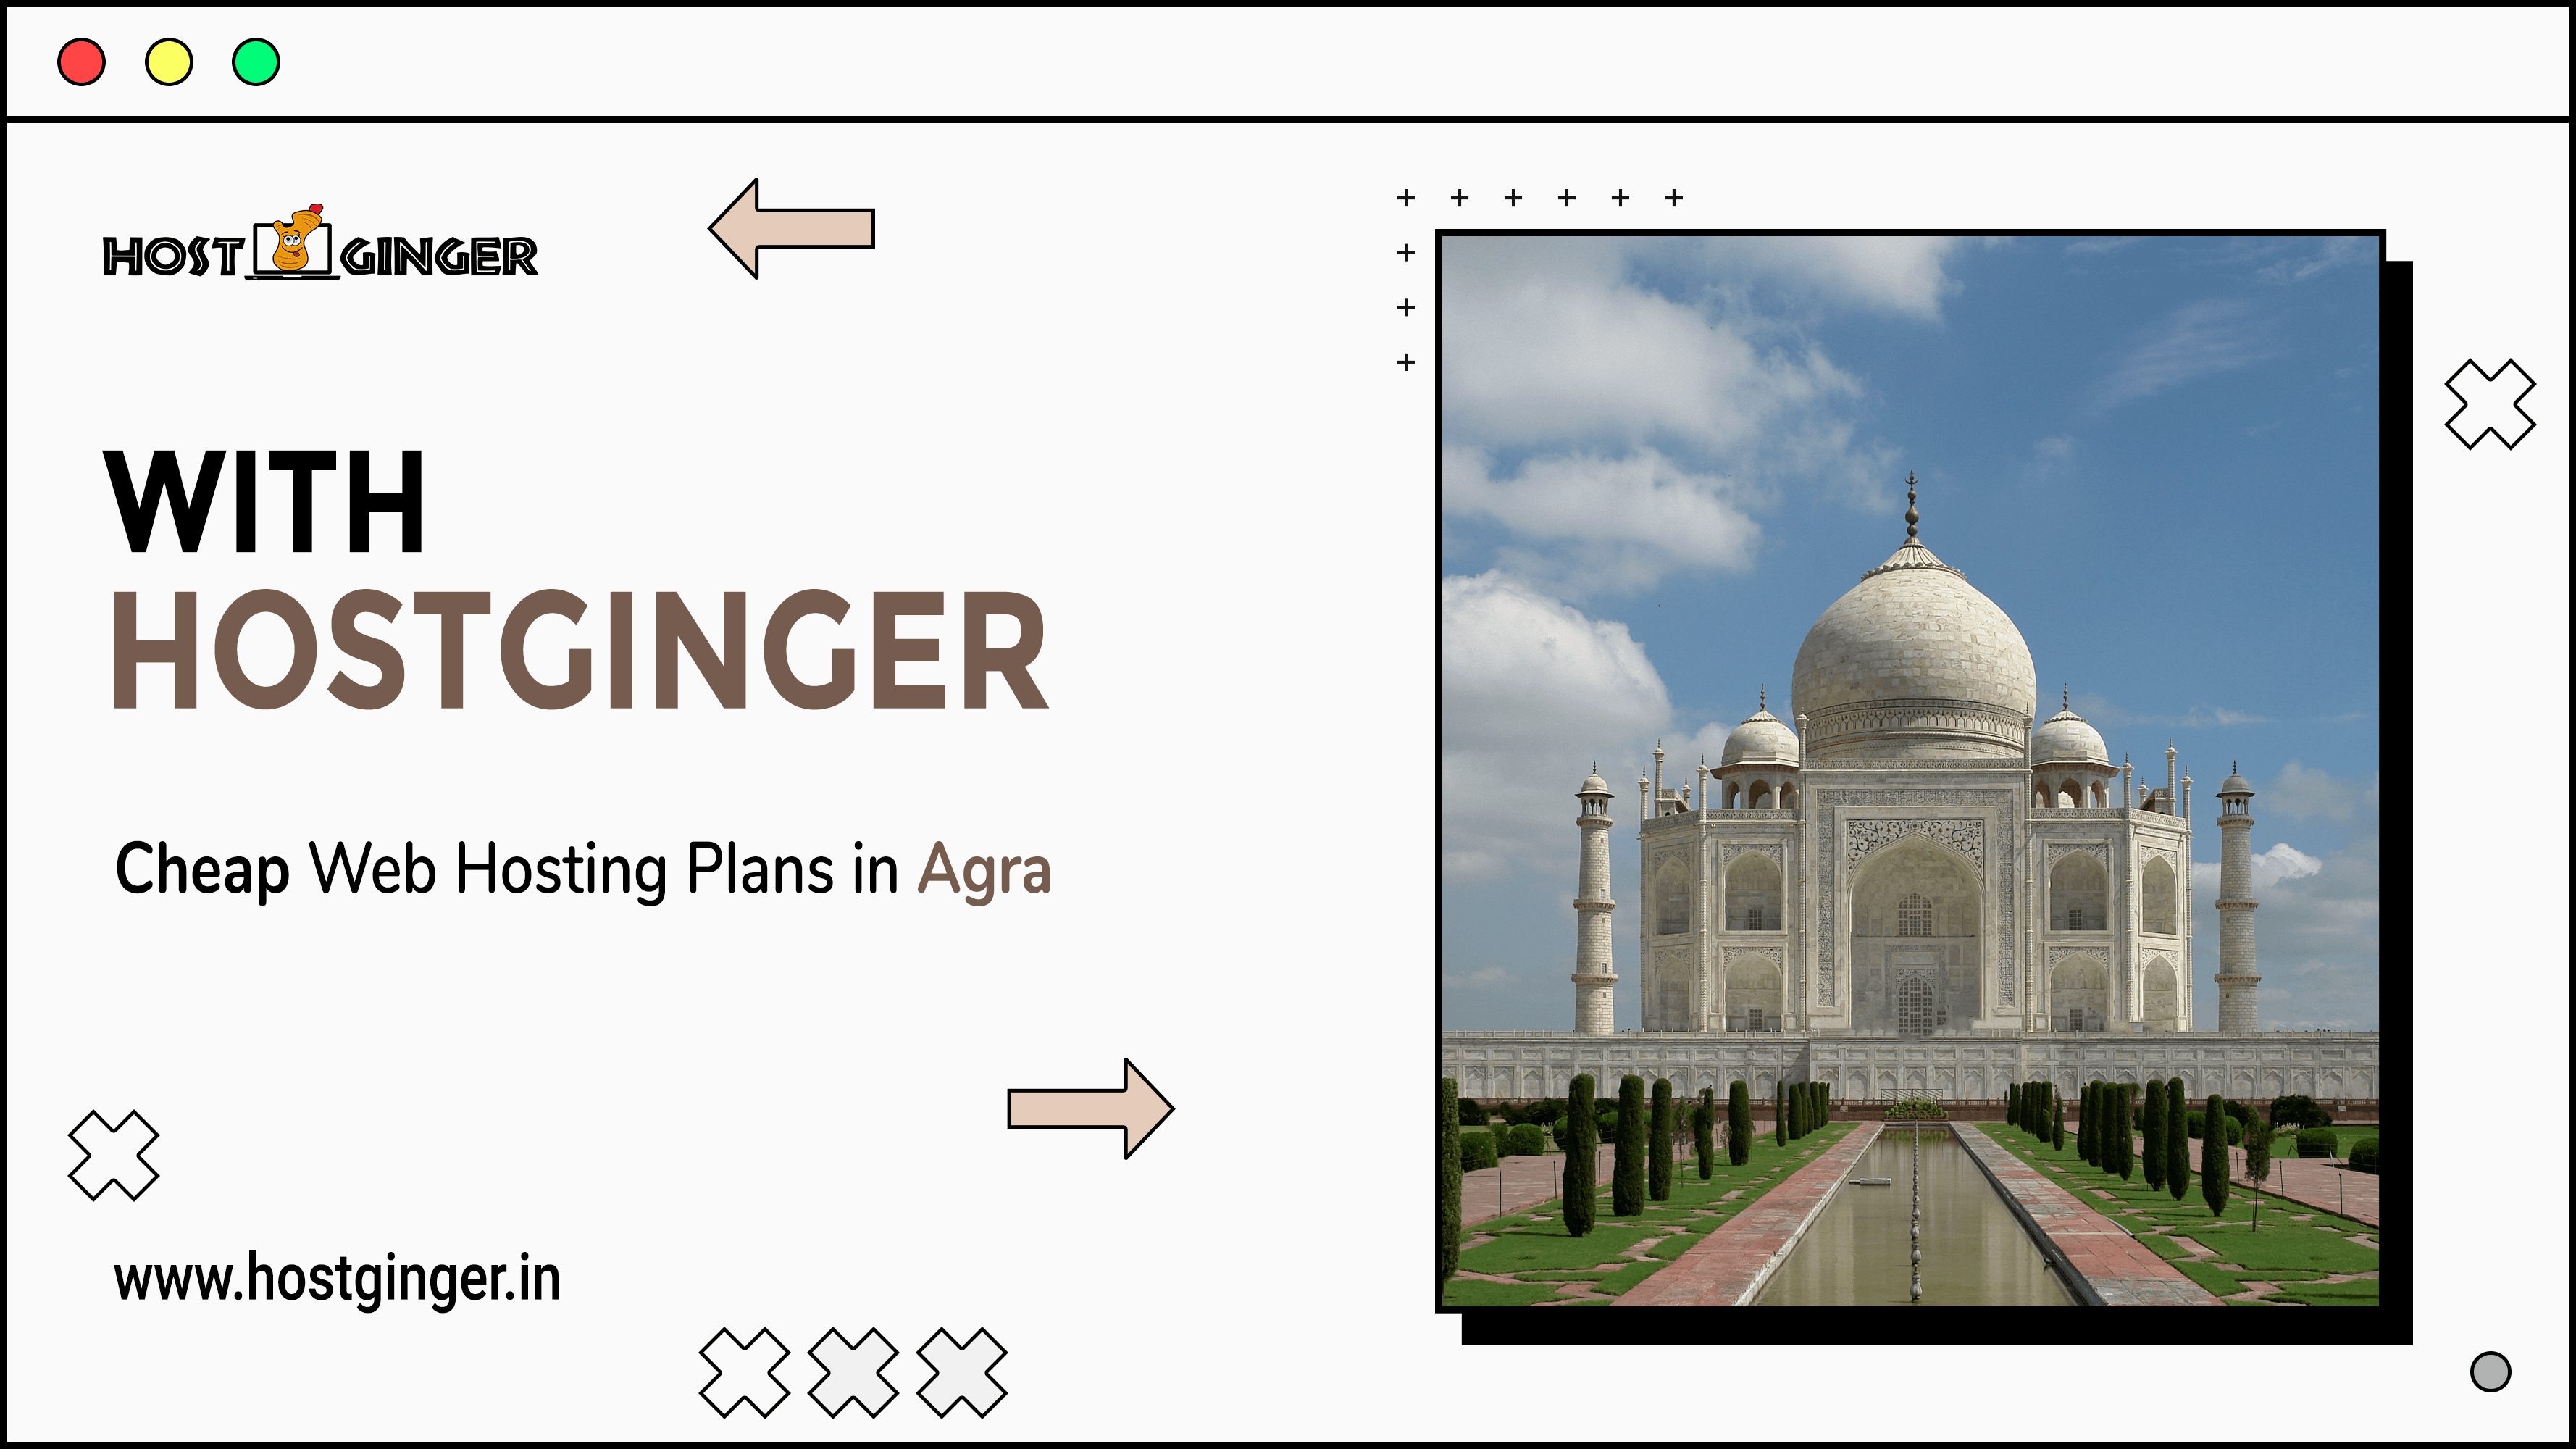 Best Web Hosting Company in Agra with Hostginger